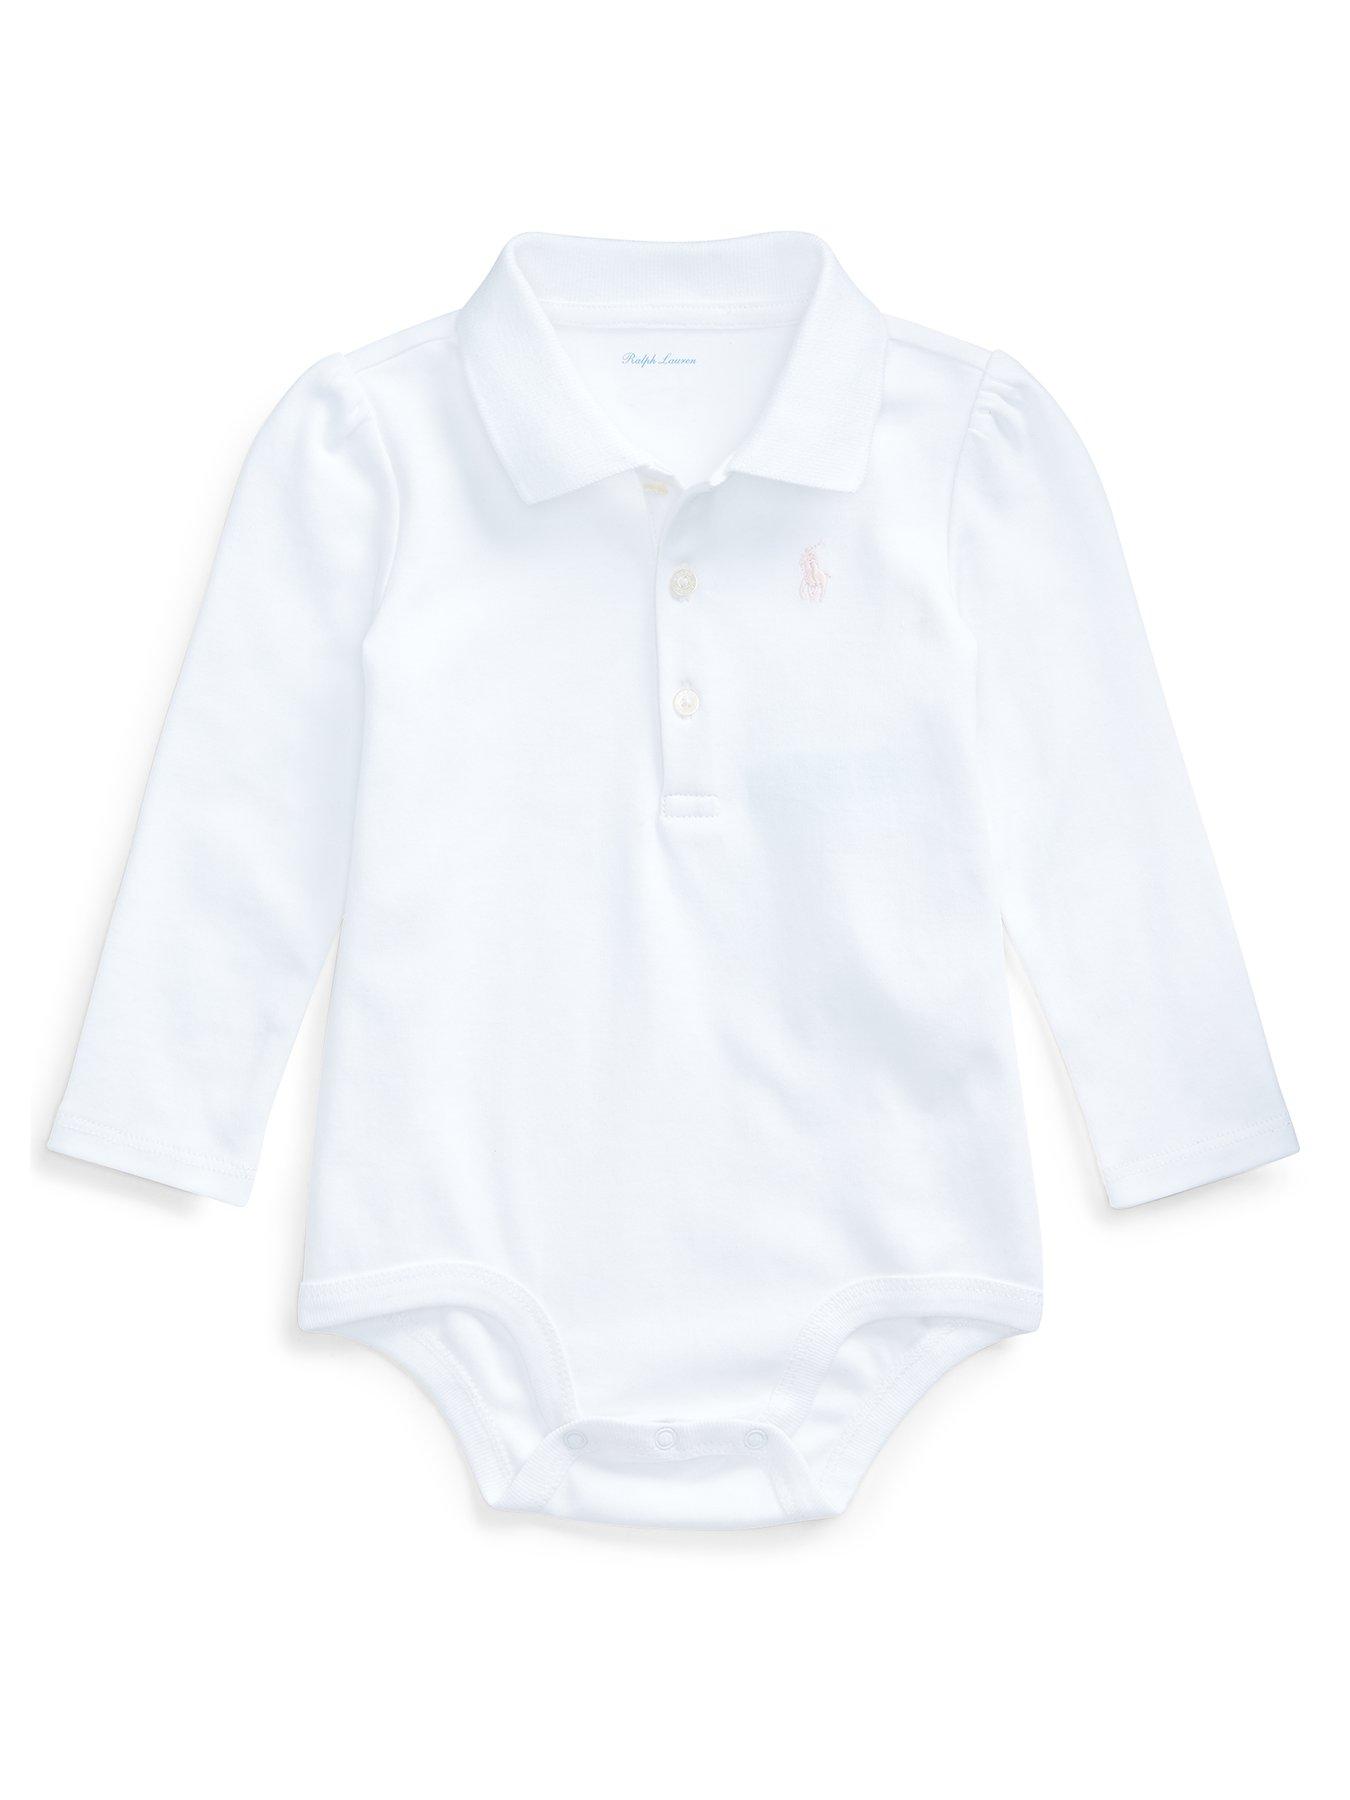 polo sweat suits for infants